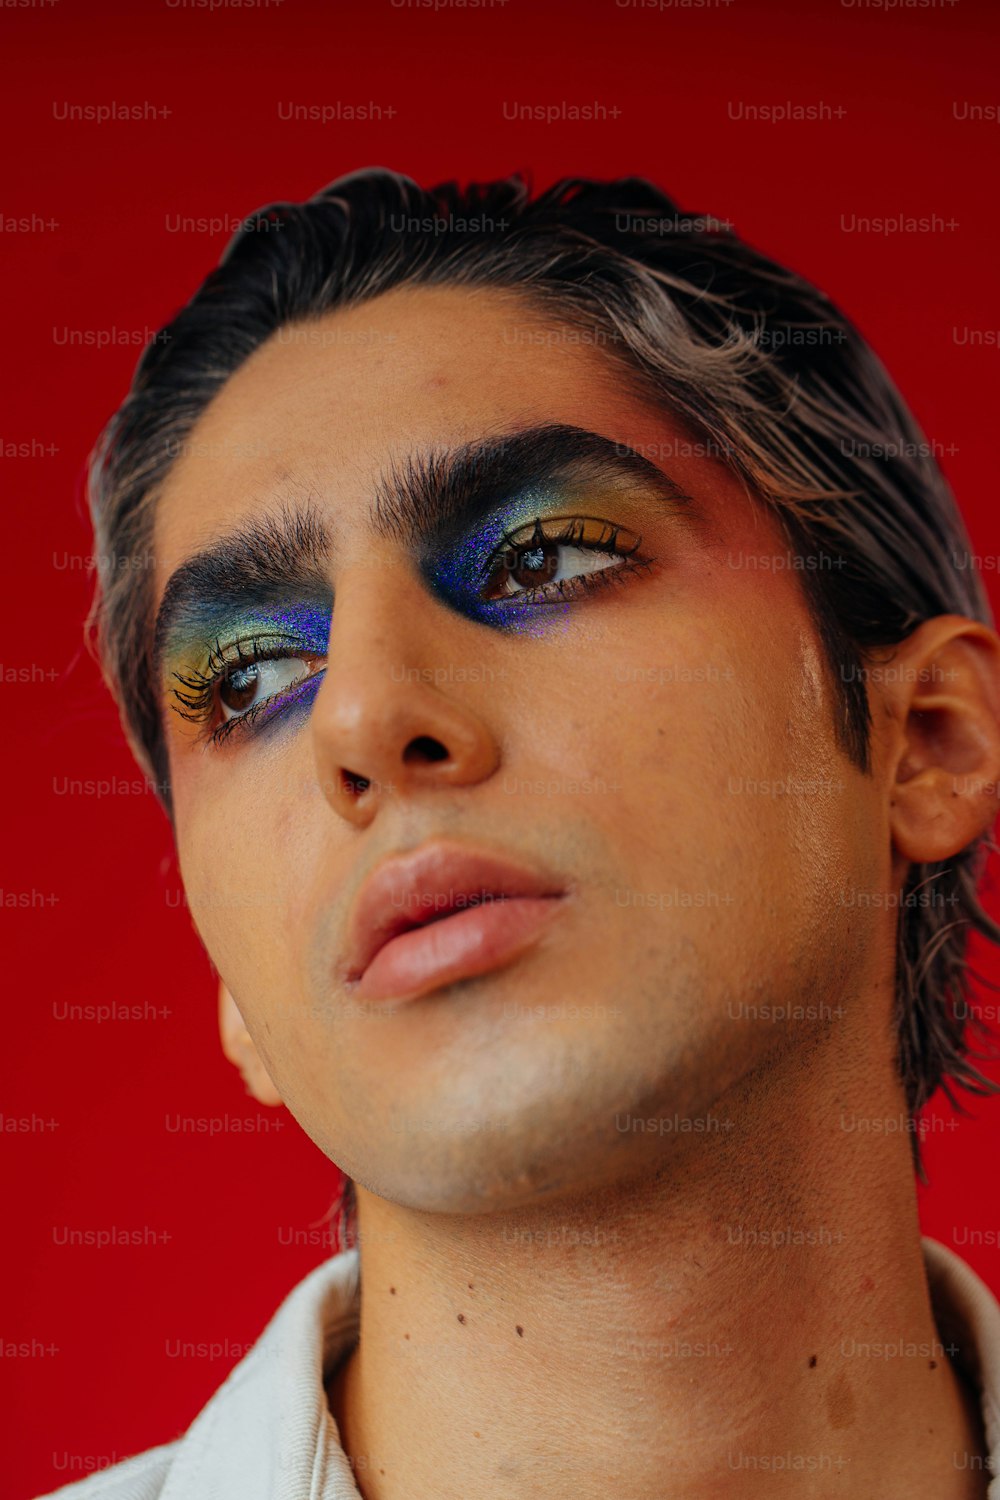 a man with blue and green eye makeup